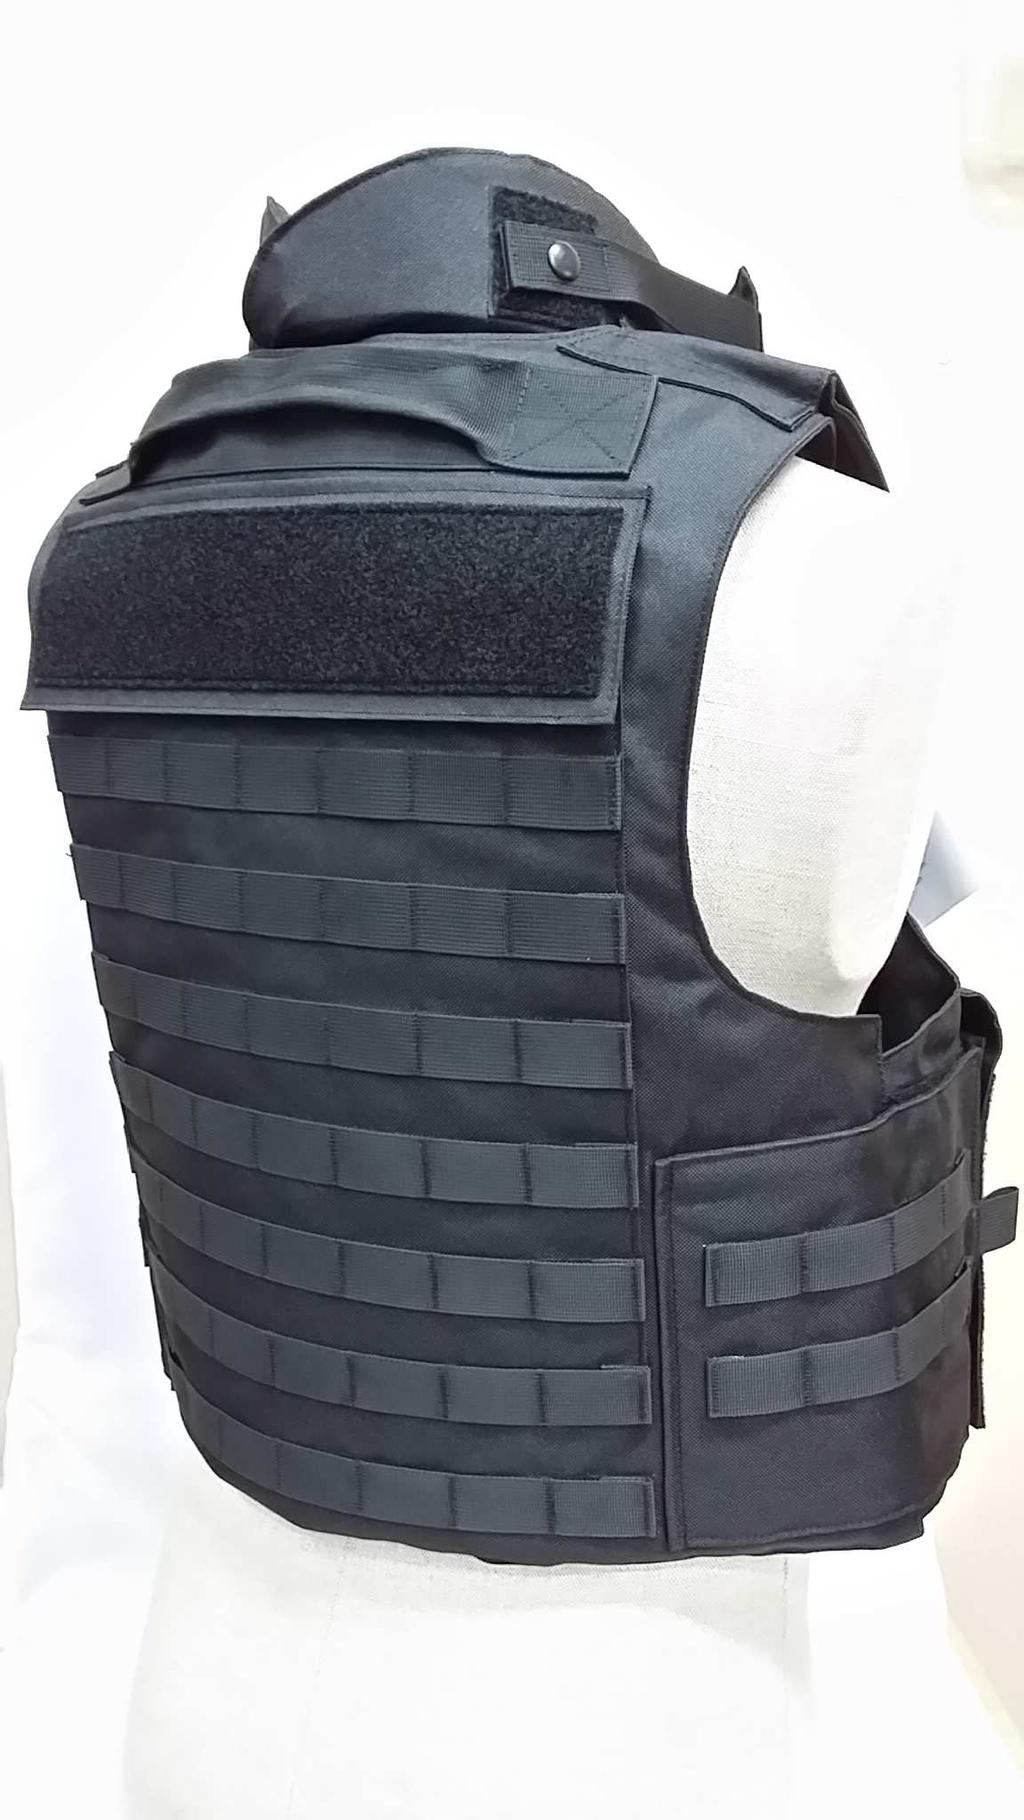 system *Adjustable shoulder points *Adjustable waist points *Quick release for rapid removal *Handle on the back for easy manipulation *Removeable Neck/Throat protector *Molle webbing for easy